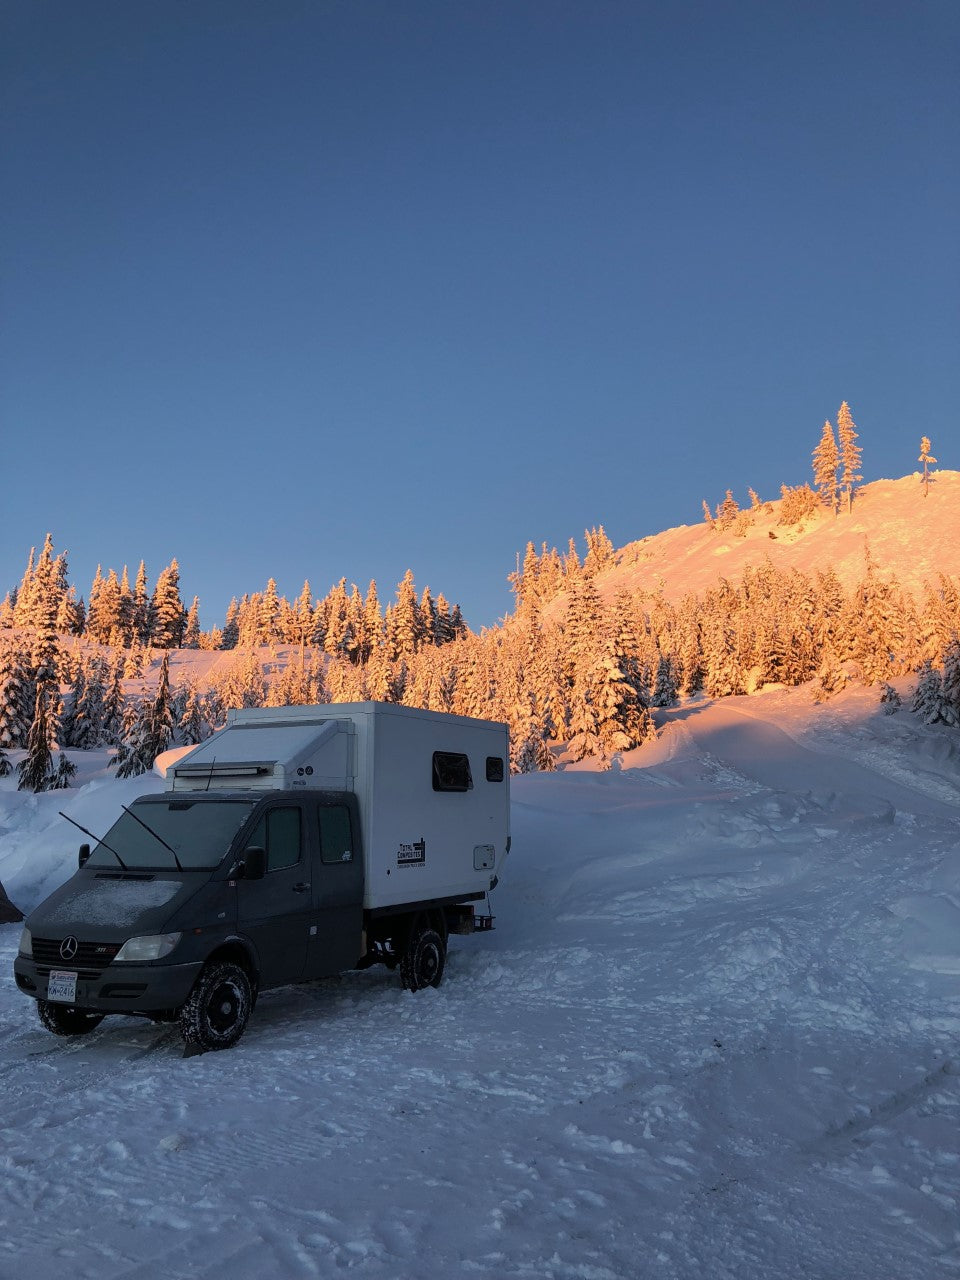 Winter camping in a total composites camper